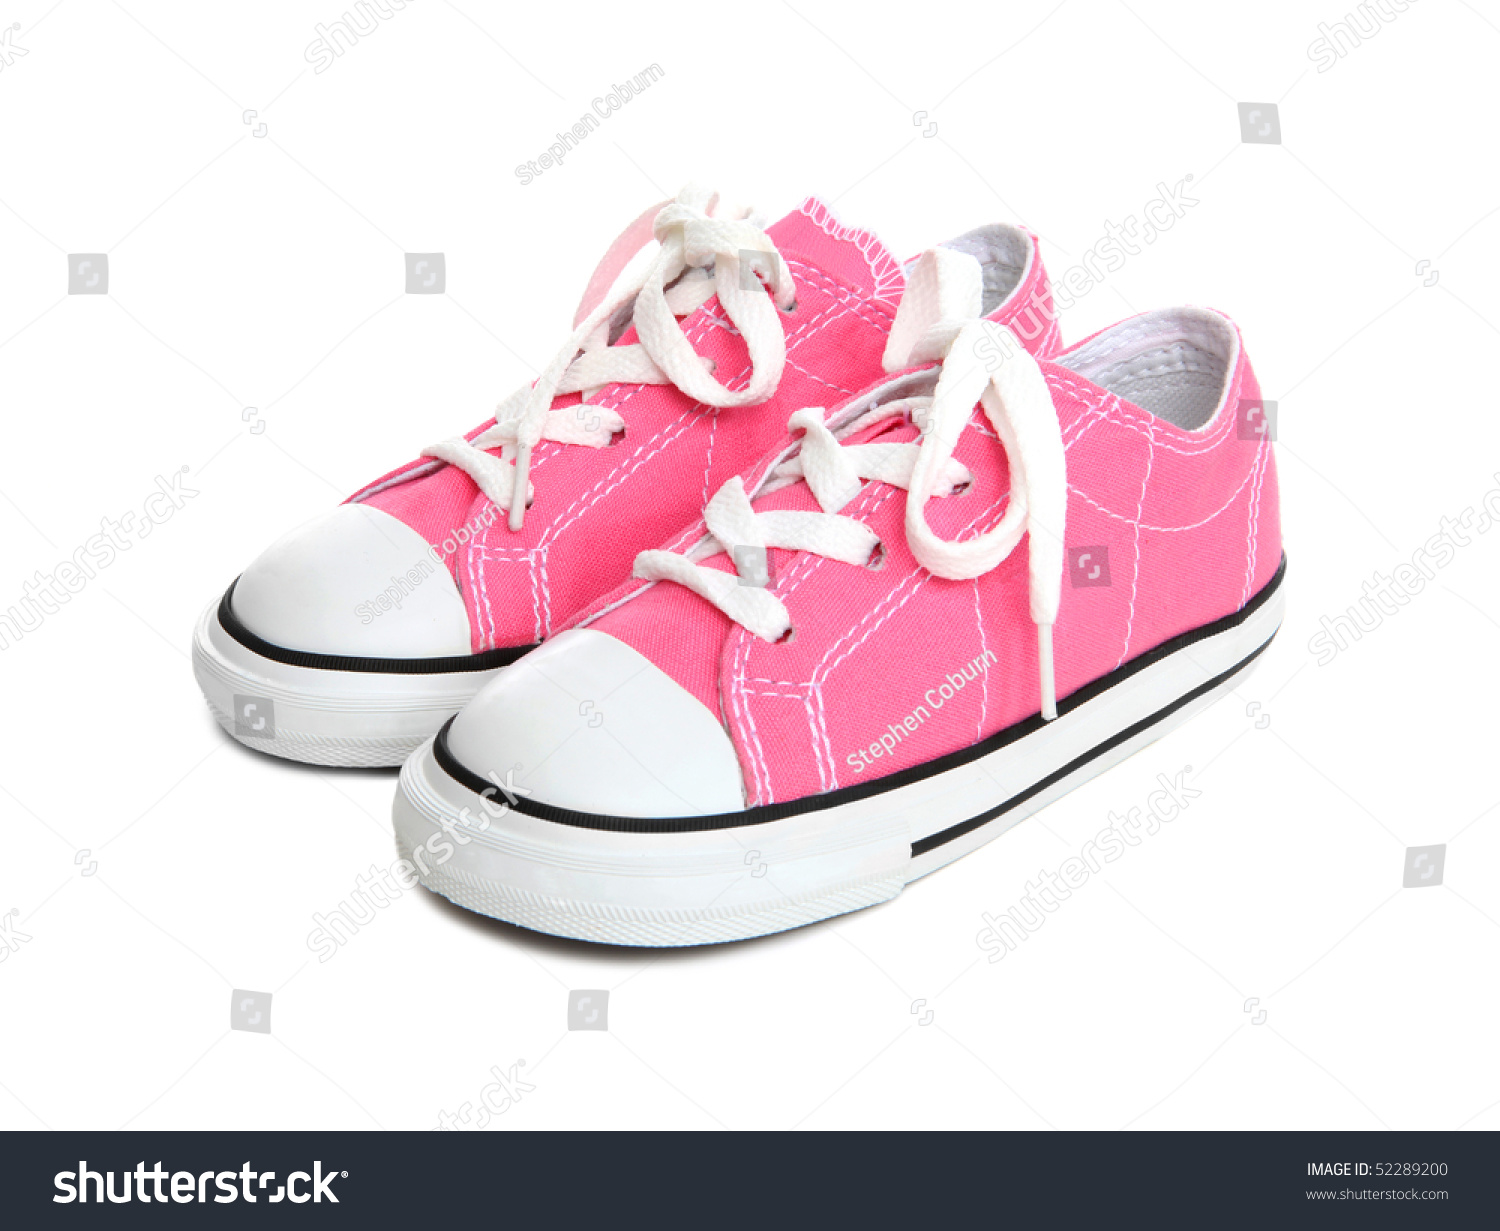 Pink Girls Sneakers Tennis Shoes Over Stock Photo 52289200 - Shutterstock